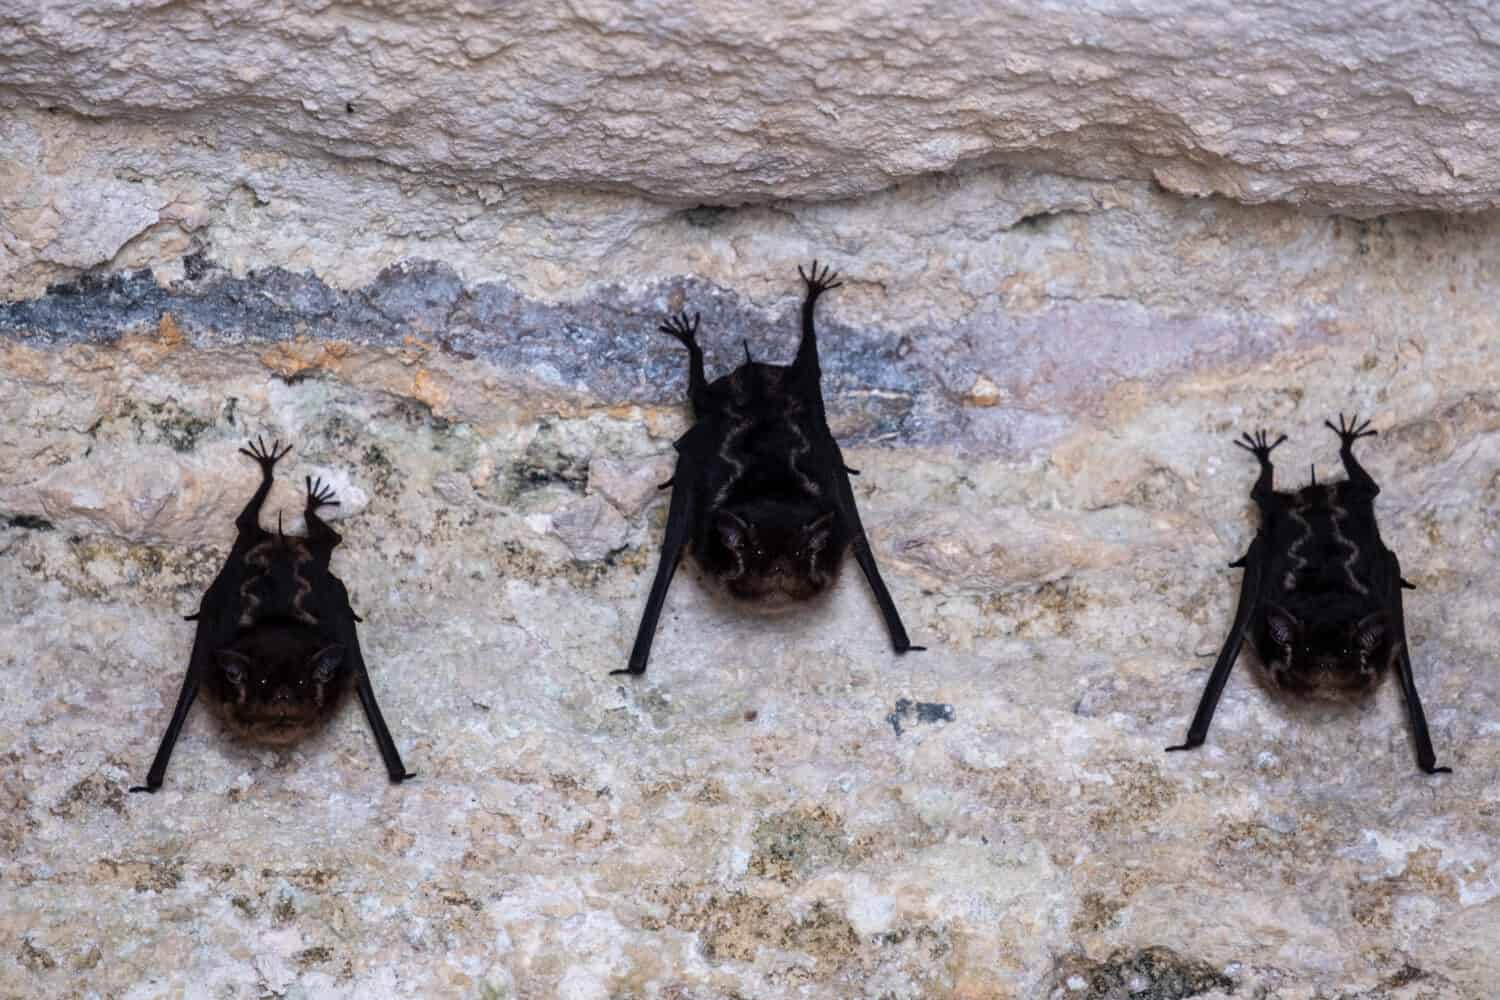 Close up of three bats holding on to rocks. Resting bats.